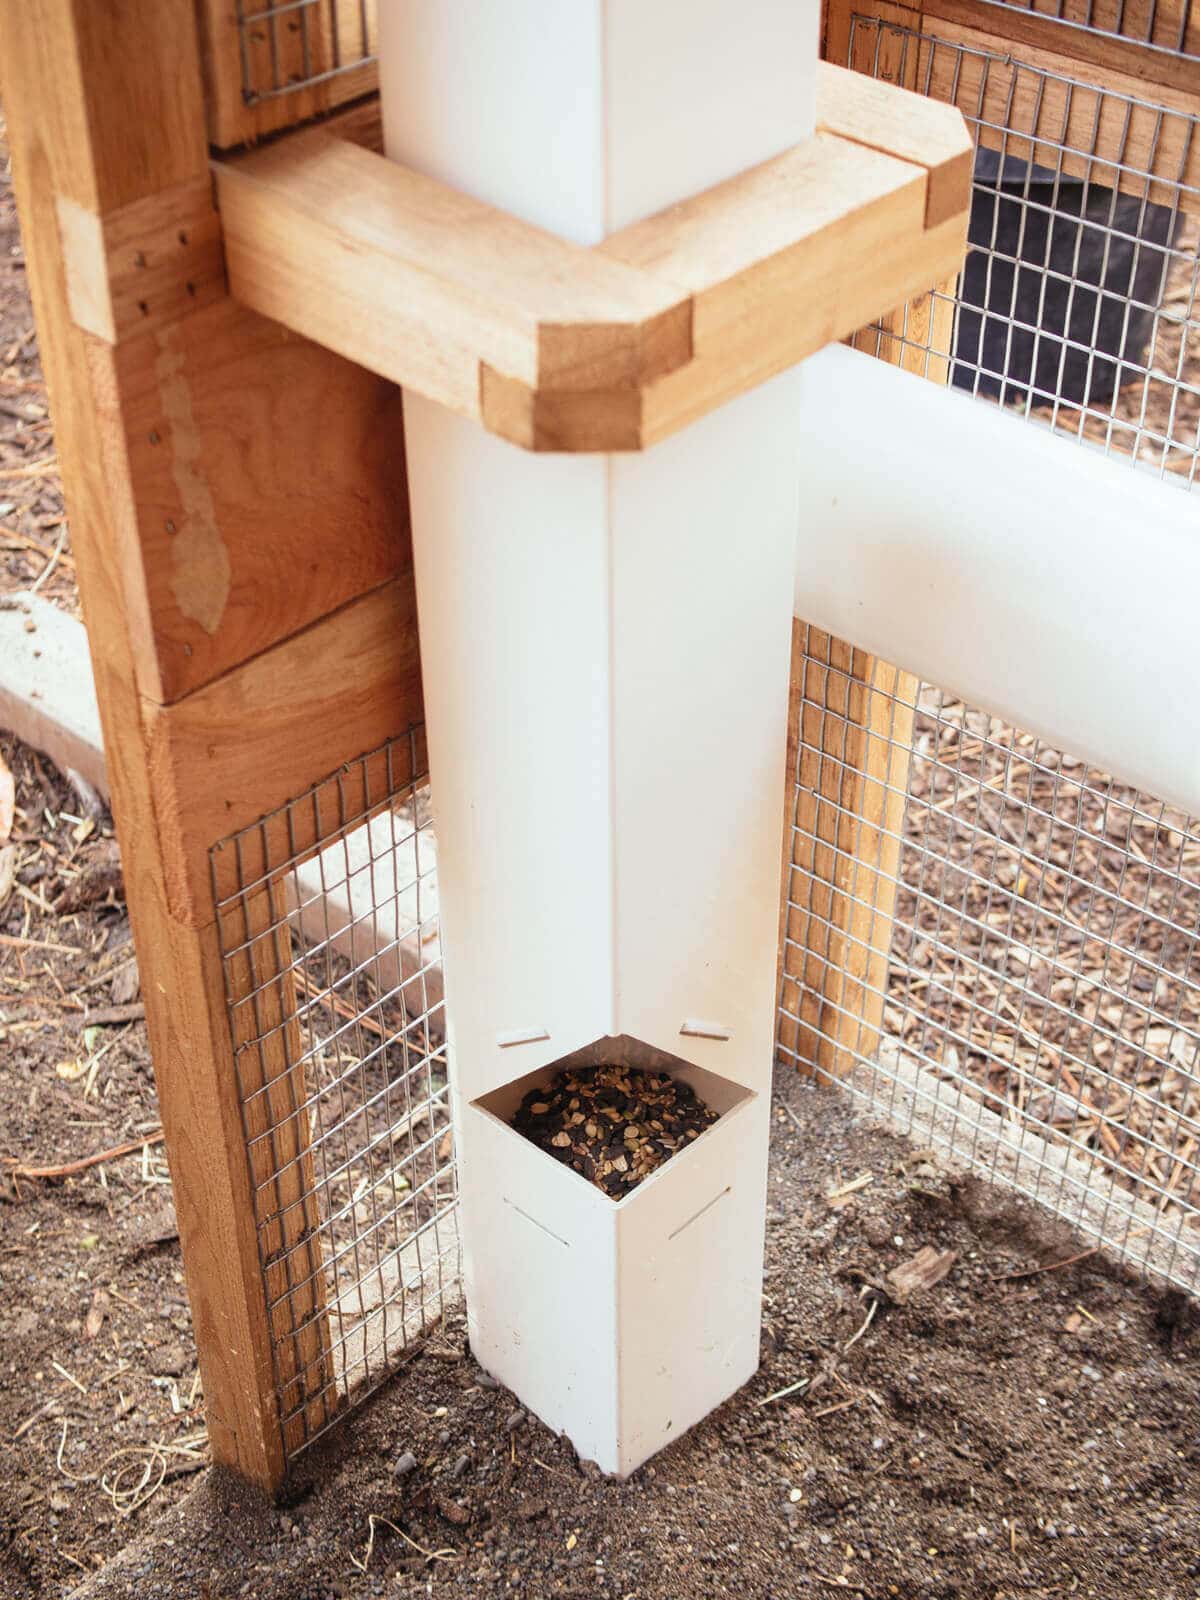 No-poop chicken feeder cuts down on mess and waste